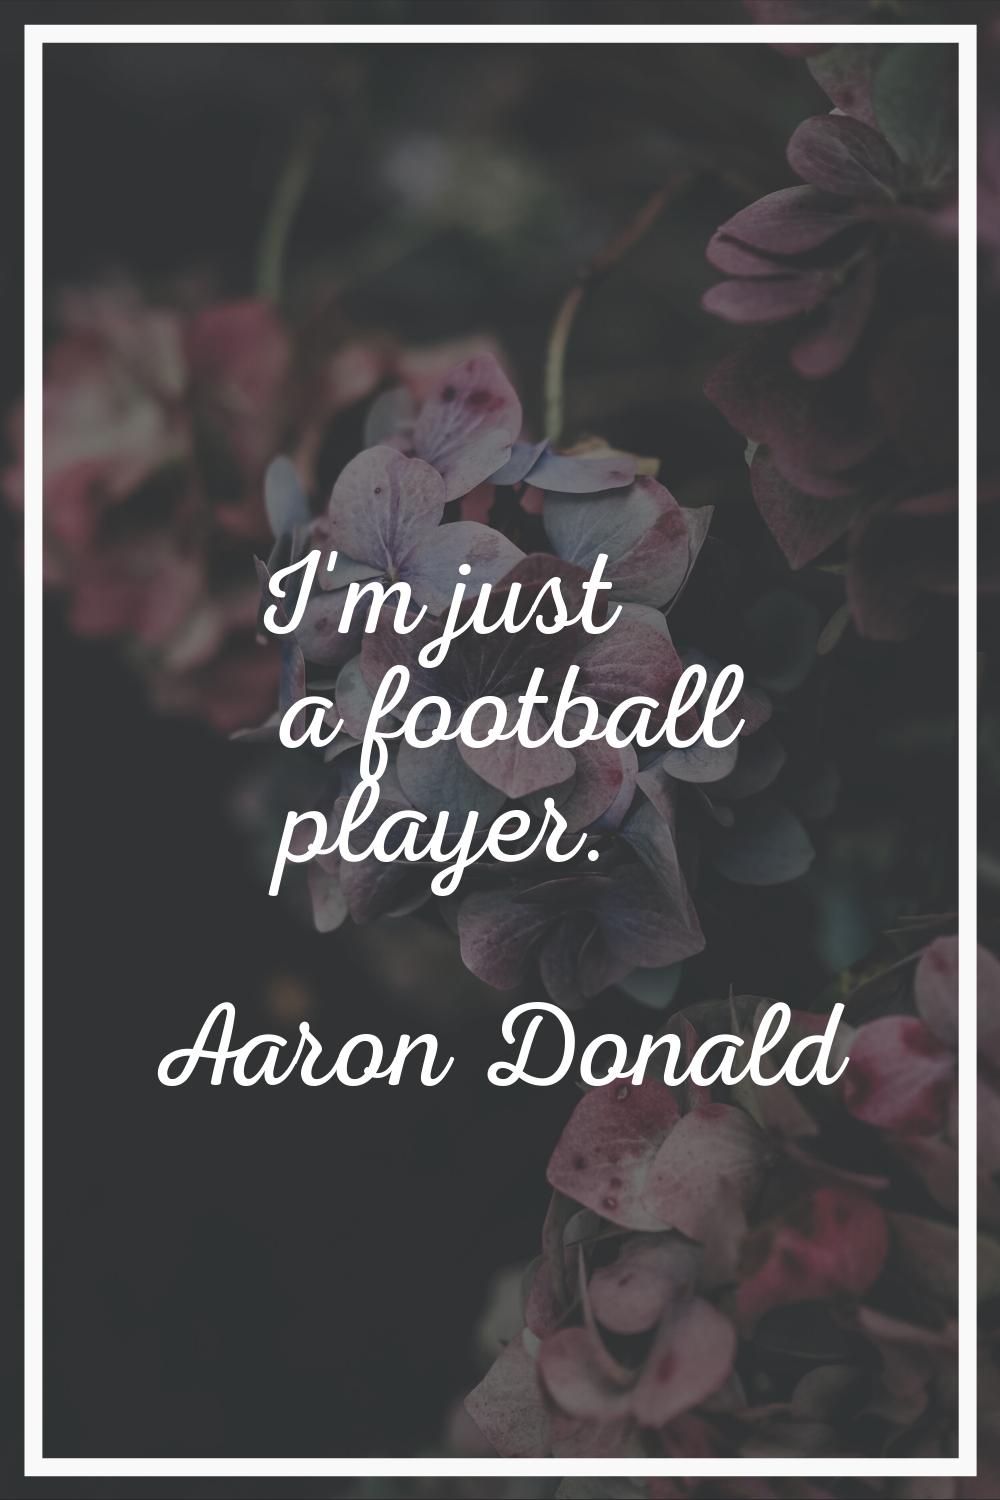 I'm just a football player.